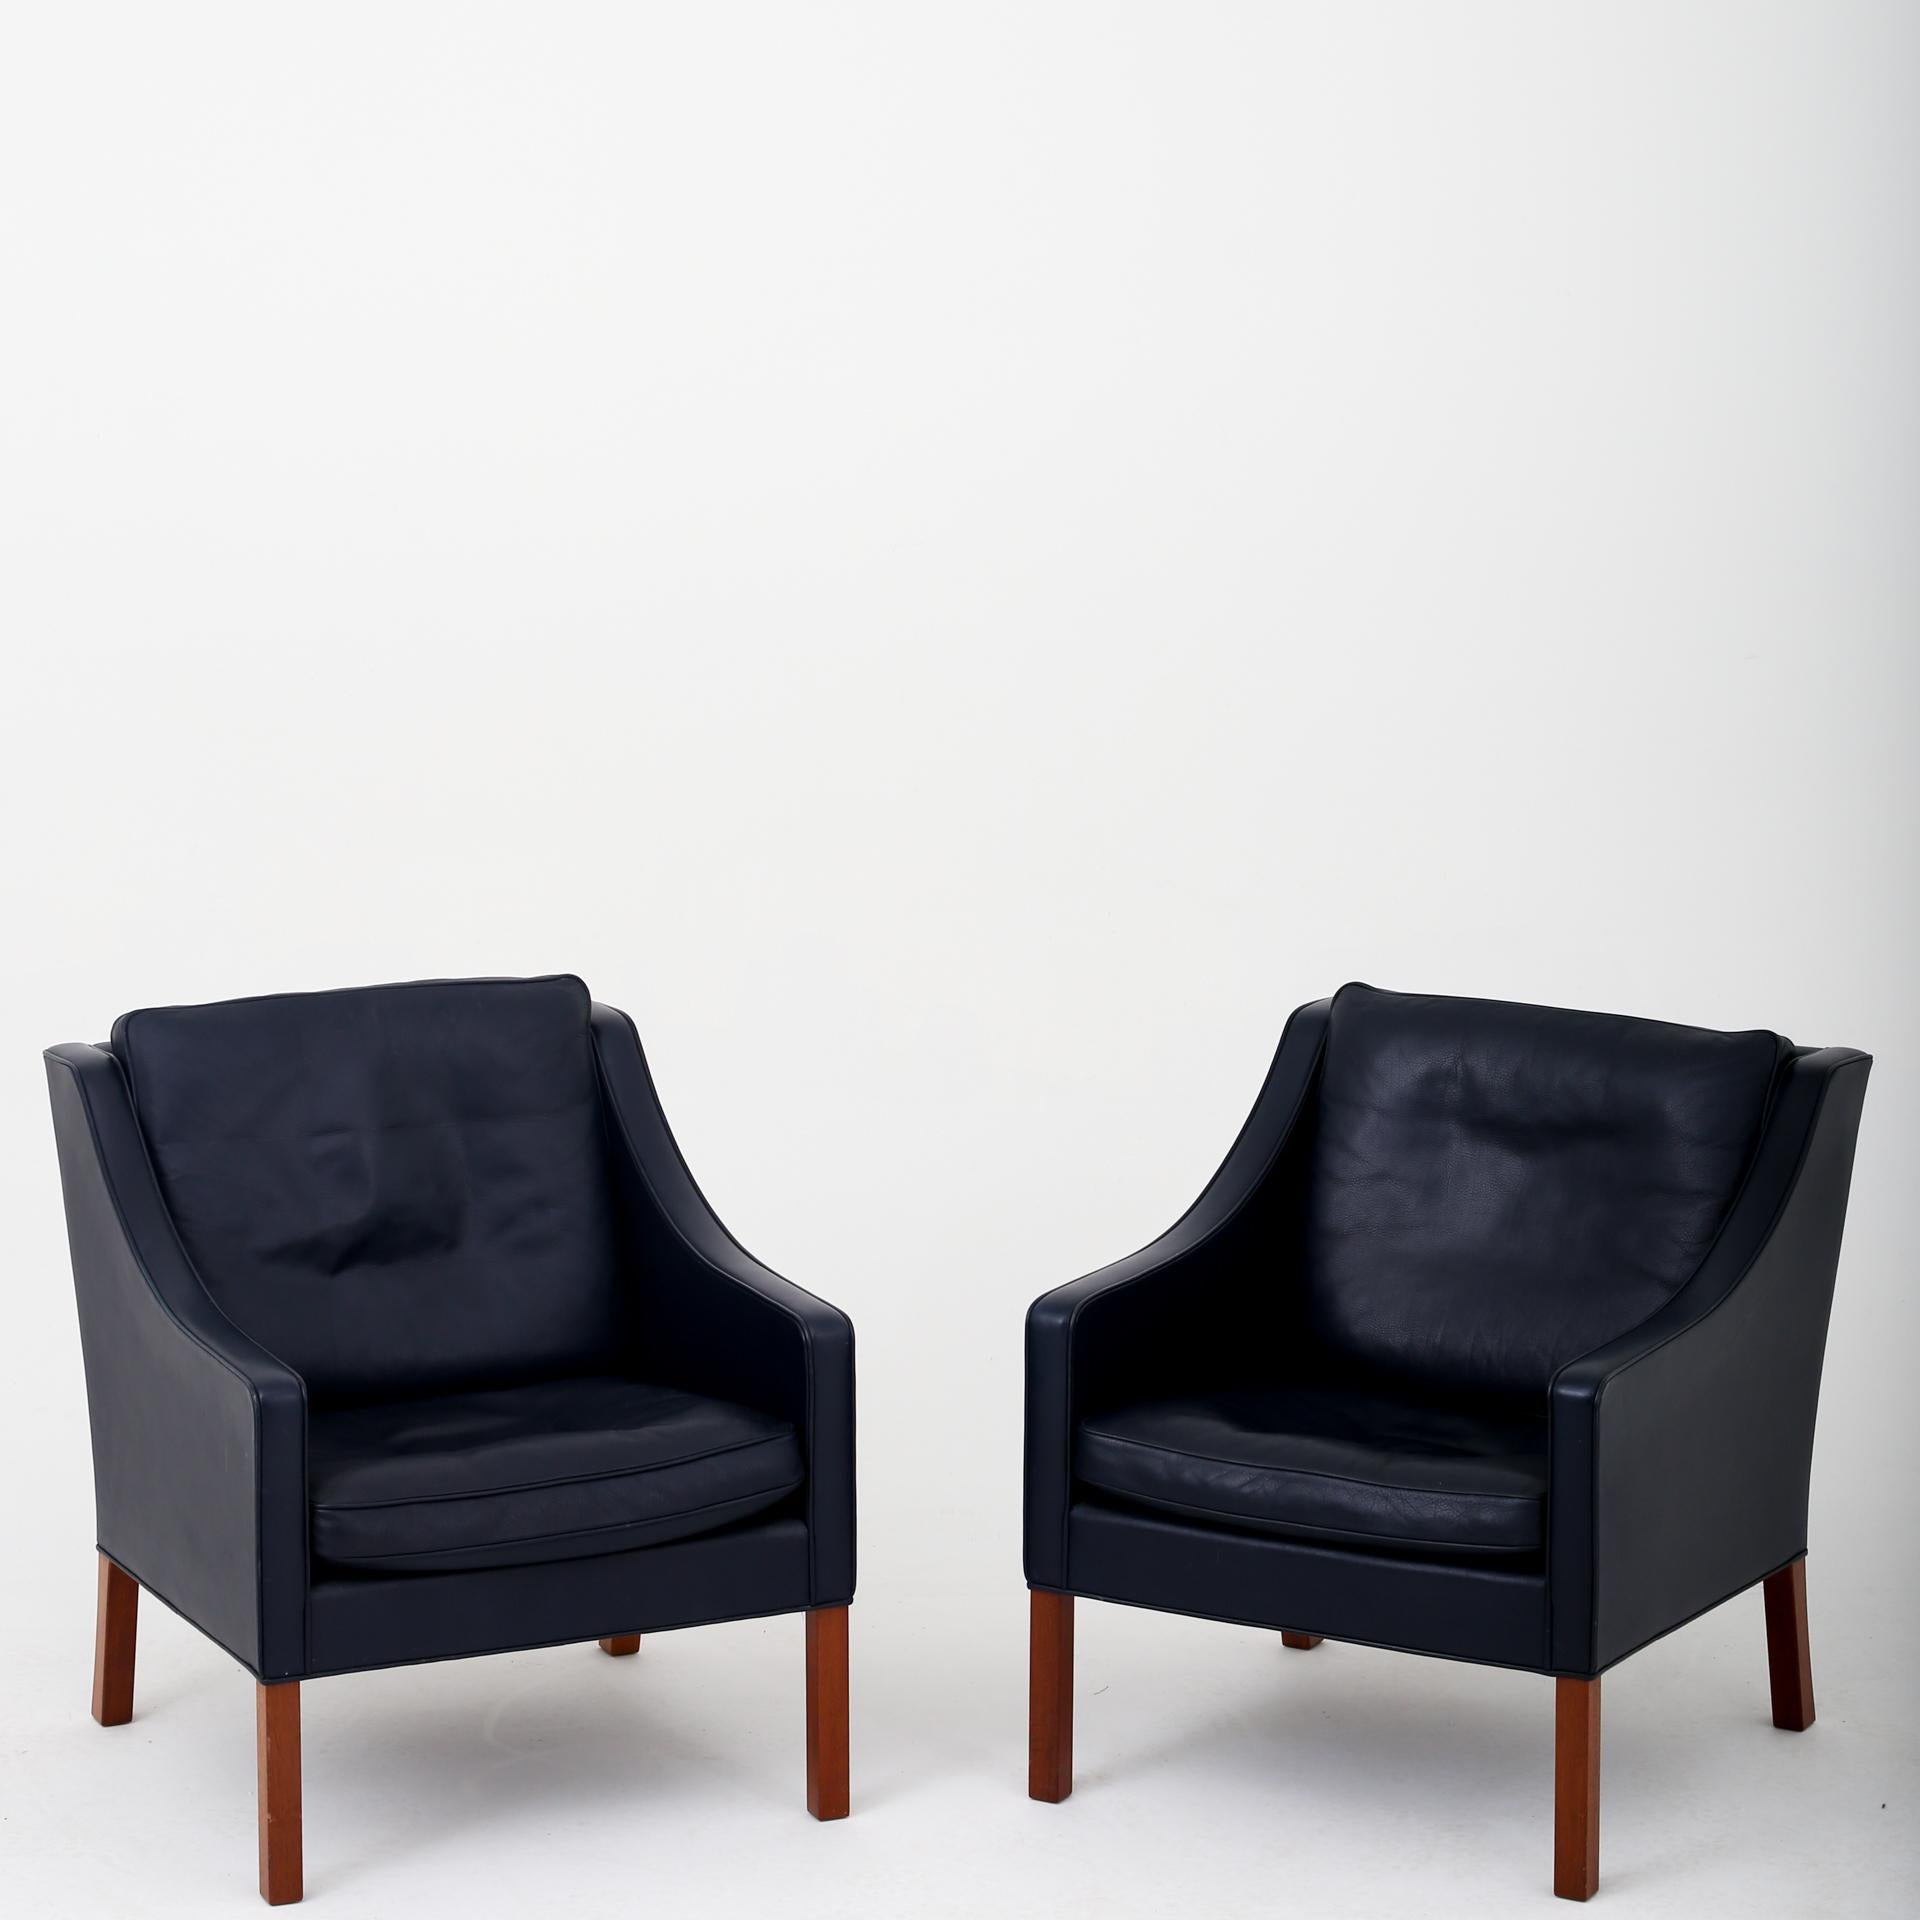 Børge Mogensen set of 2 BM 2207 easy chairs and 1 BM 2213 sofa in dark blue semi-aniline leather with mahogany legs. Maker Fredericia Furniture.